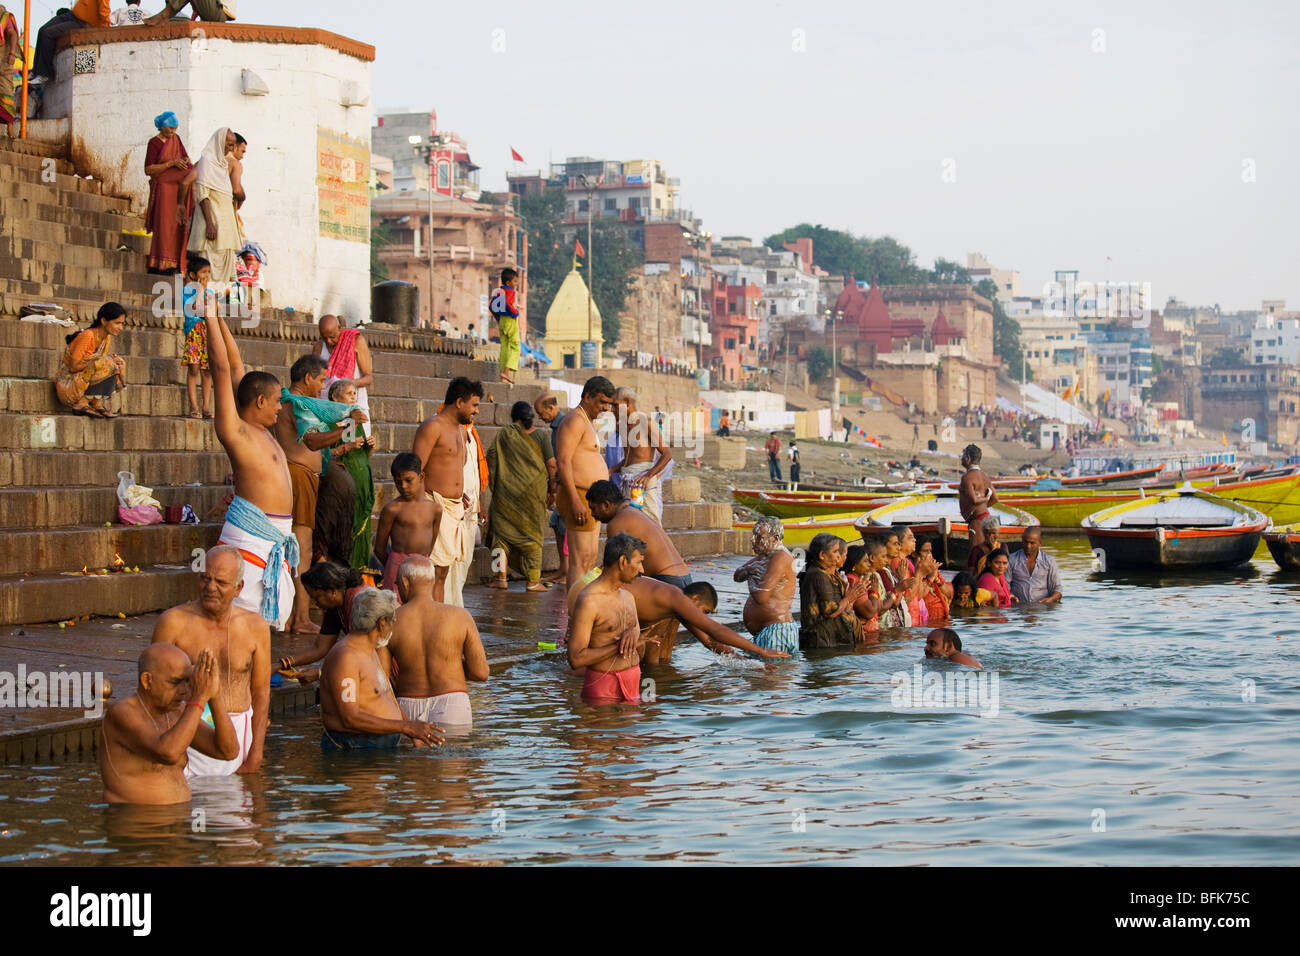 People come to pray and bathe in the early morning in the Ganges River at the Hindu holy city of Varanasi, India Stock Photo